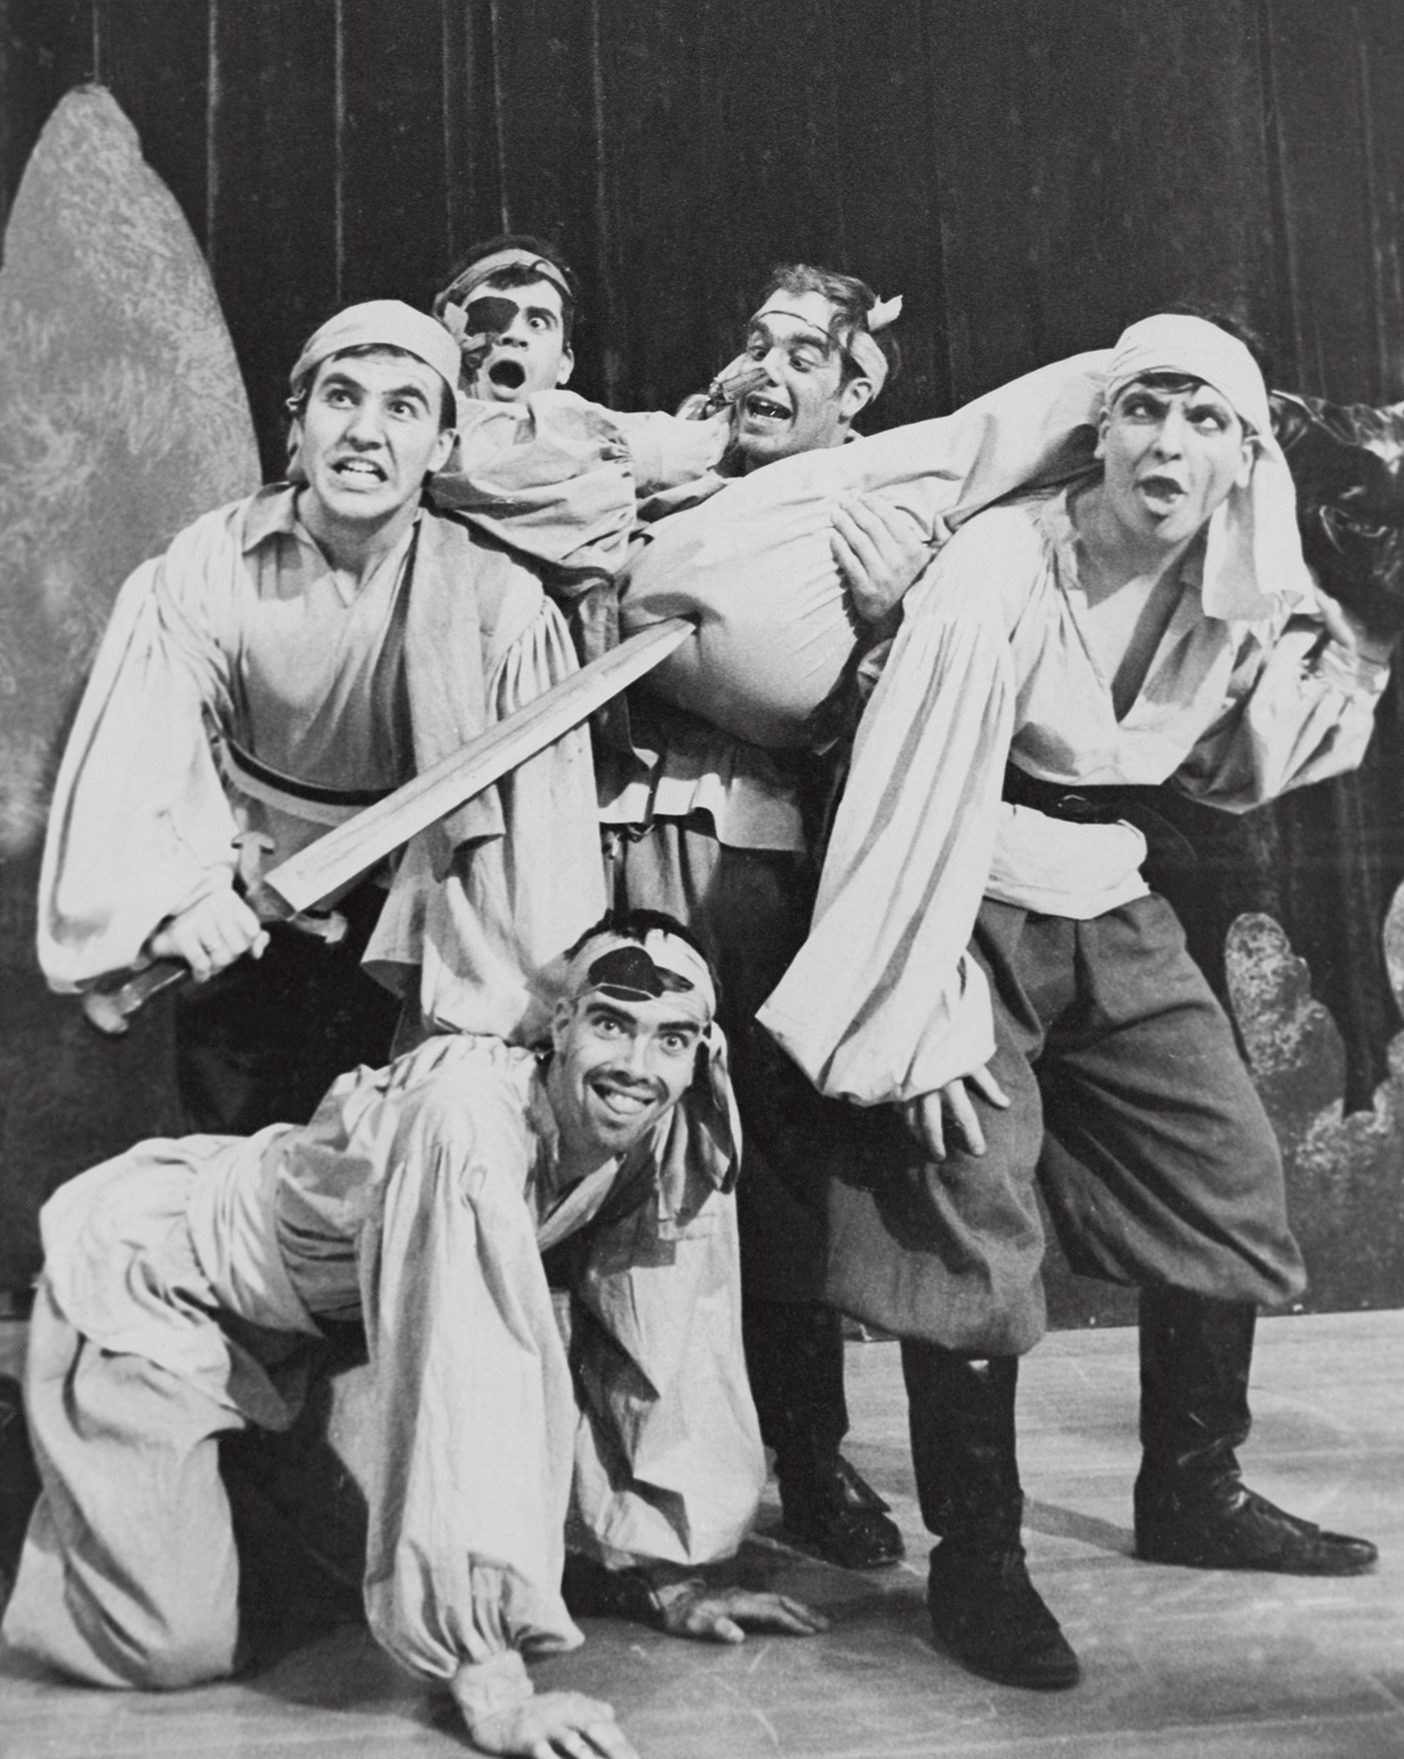 A black and white photo from the 1960s of a group of male BYU students dressed as pirates making funny faces.